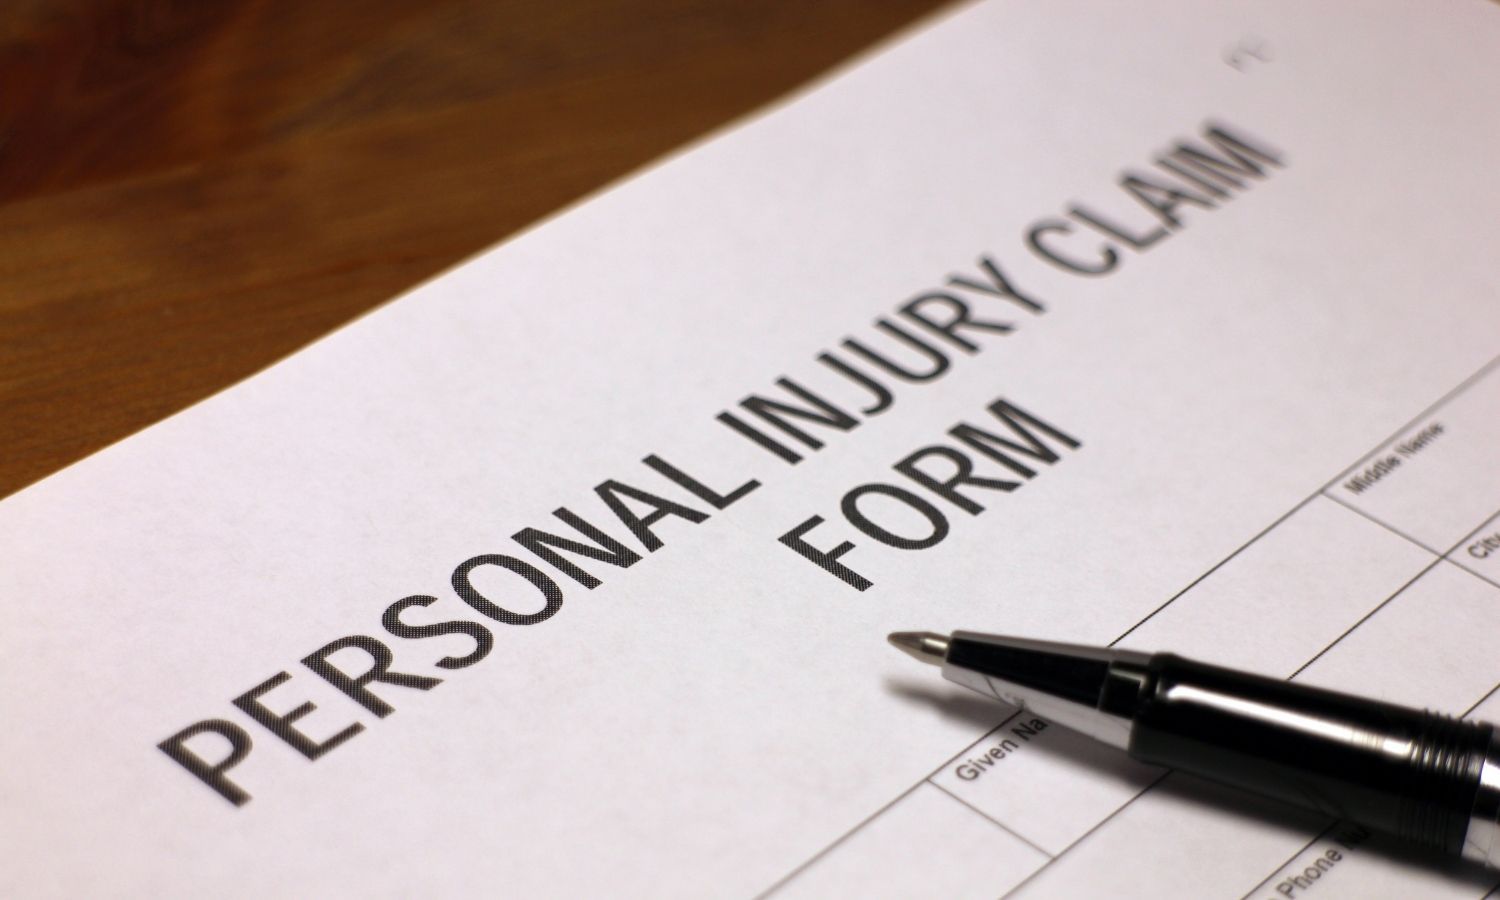 How do I make a claim for personal injury caused by a faulty product?